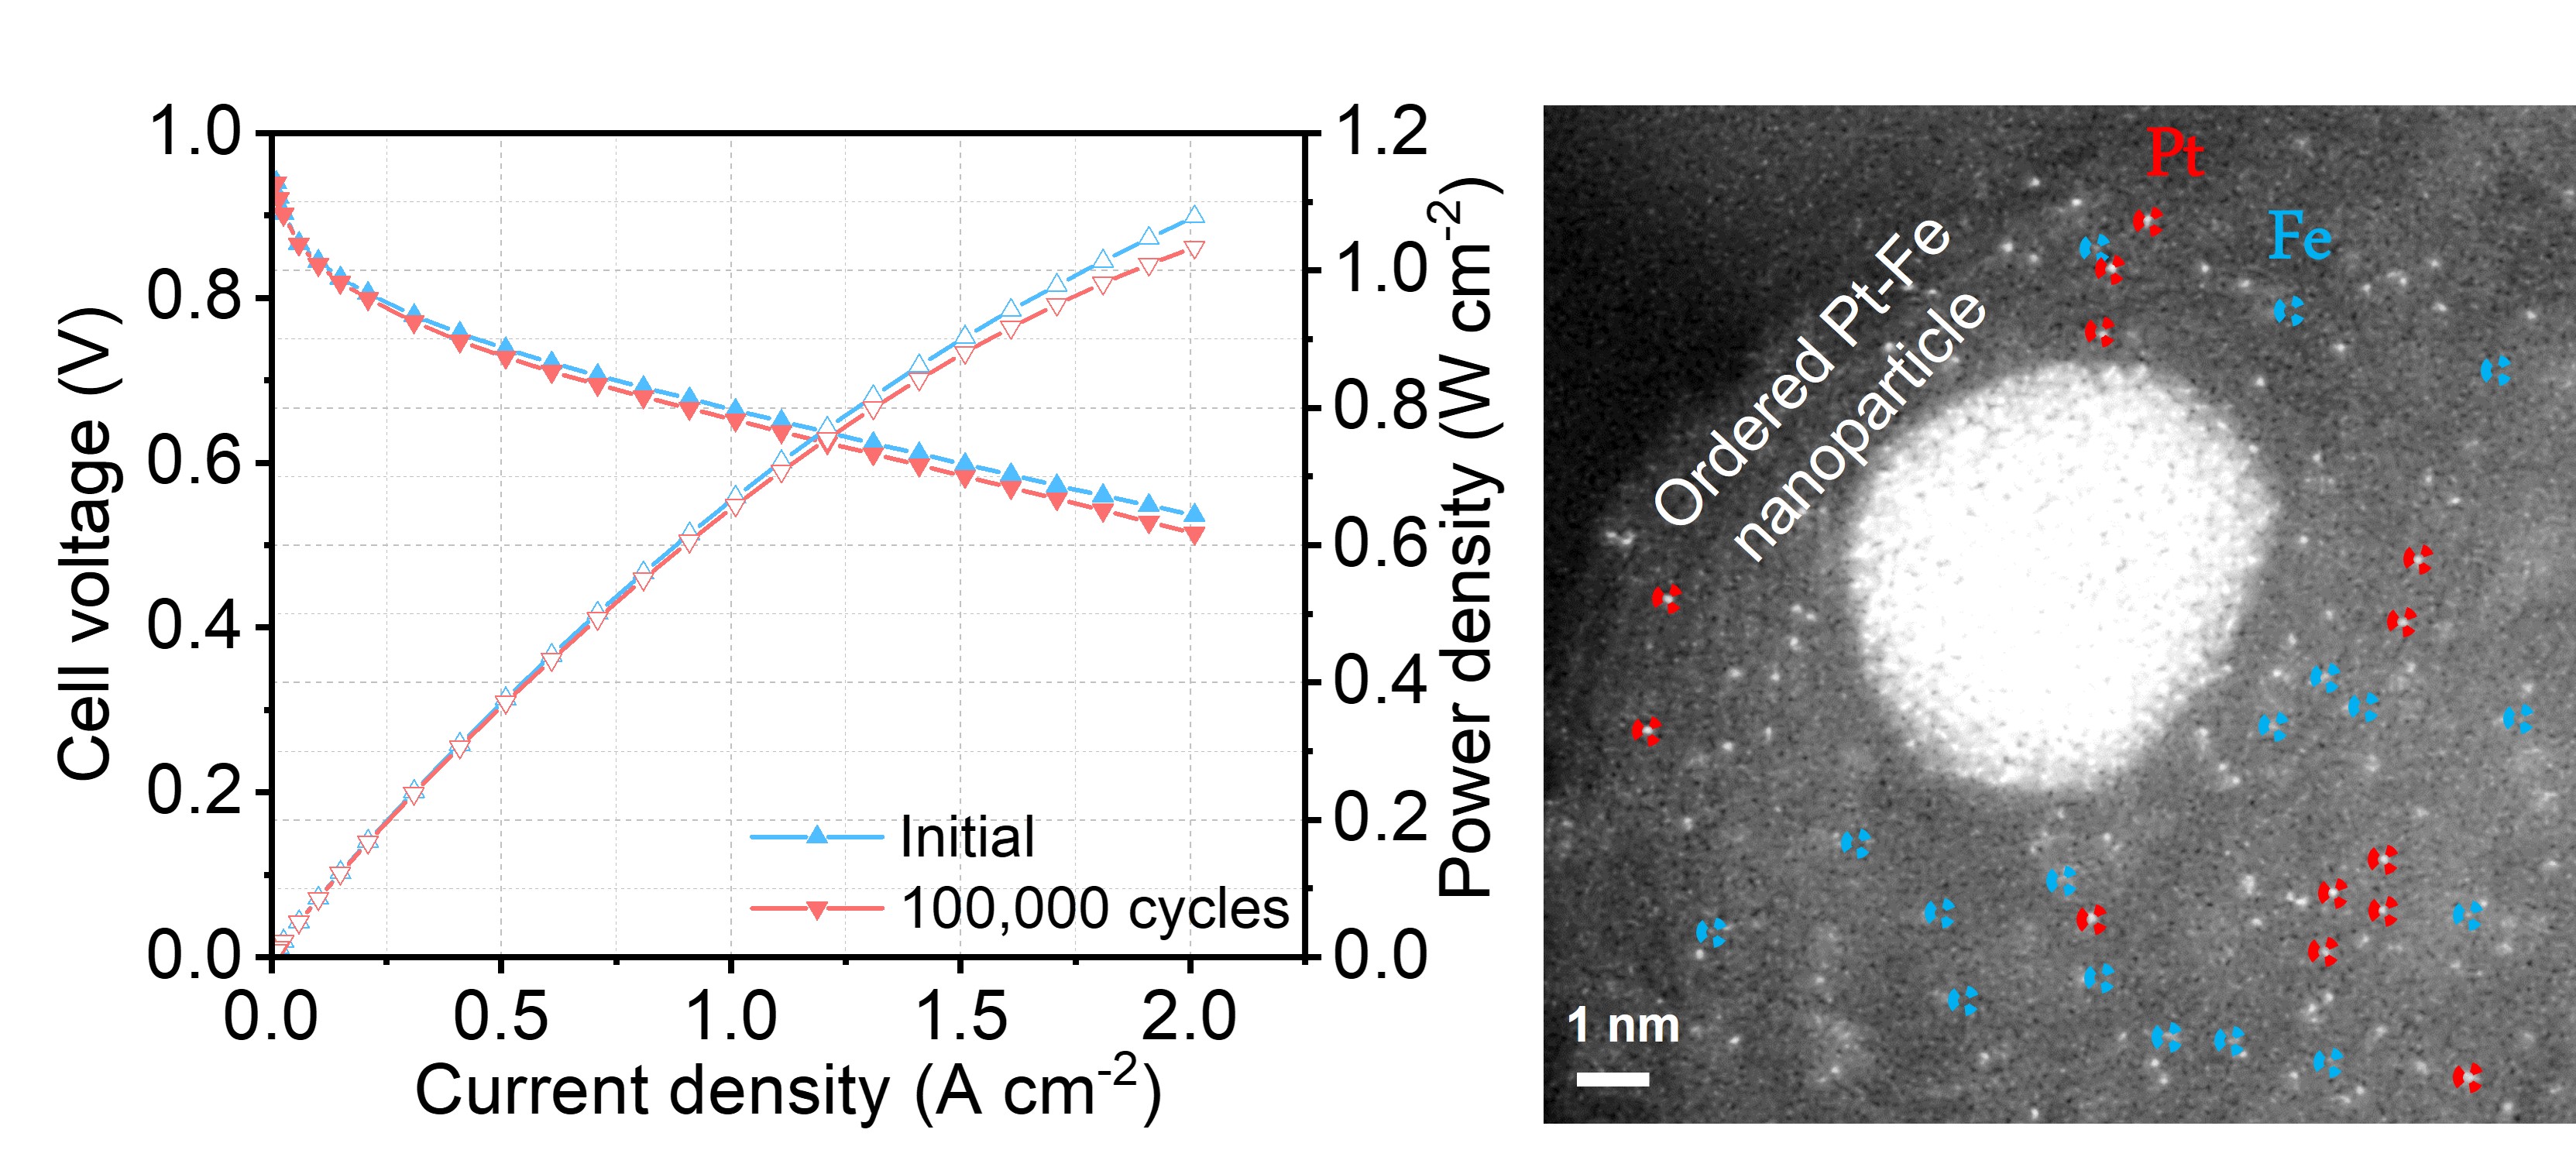 (Left) The new hybrid catalyst maintains the platinum catalytic activity at 97% after 100,000 cycles of accelerated stress test, (Right) The new electrocatalyst contains atomically dispersed platinum, iron single atoms and platinum-iron nanoparticles.